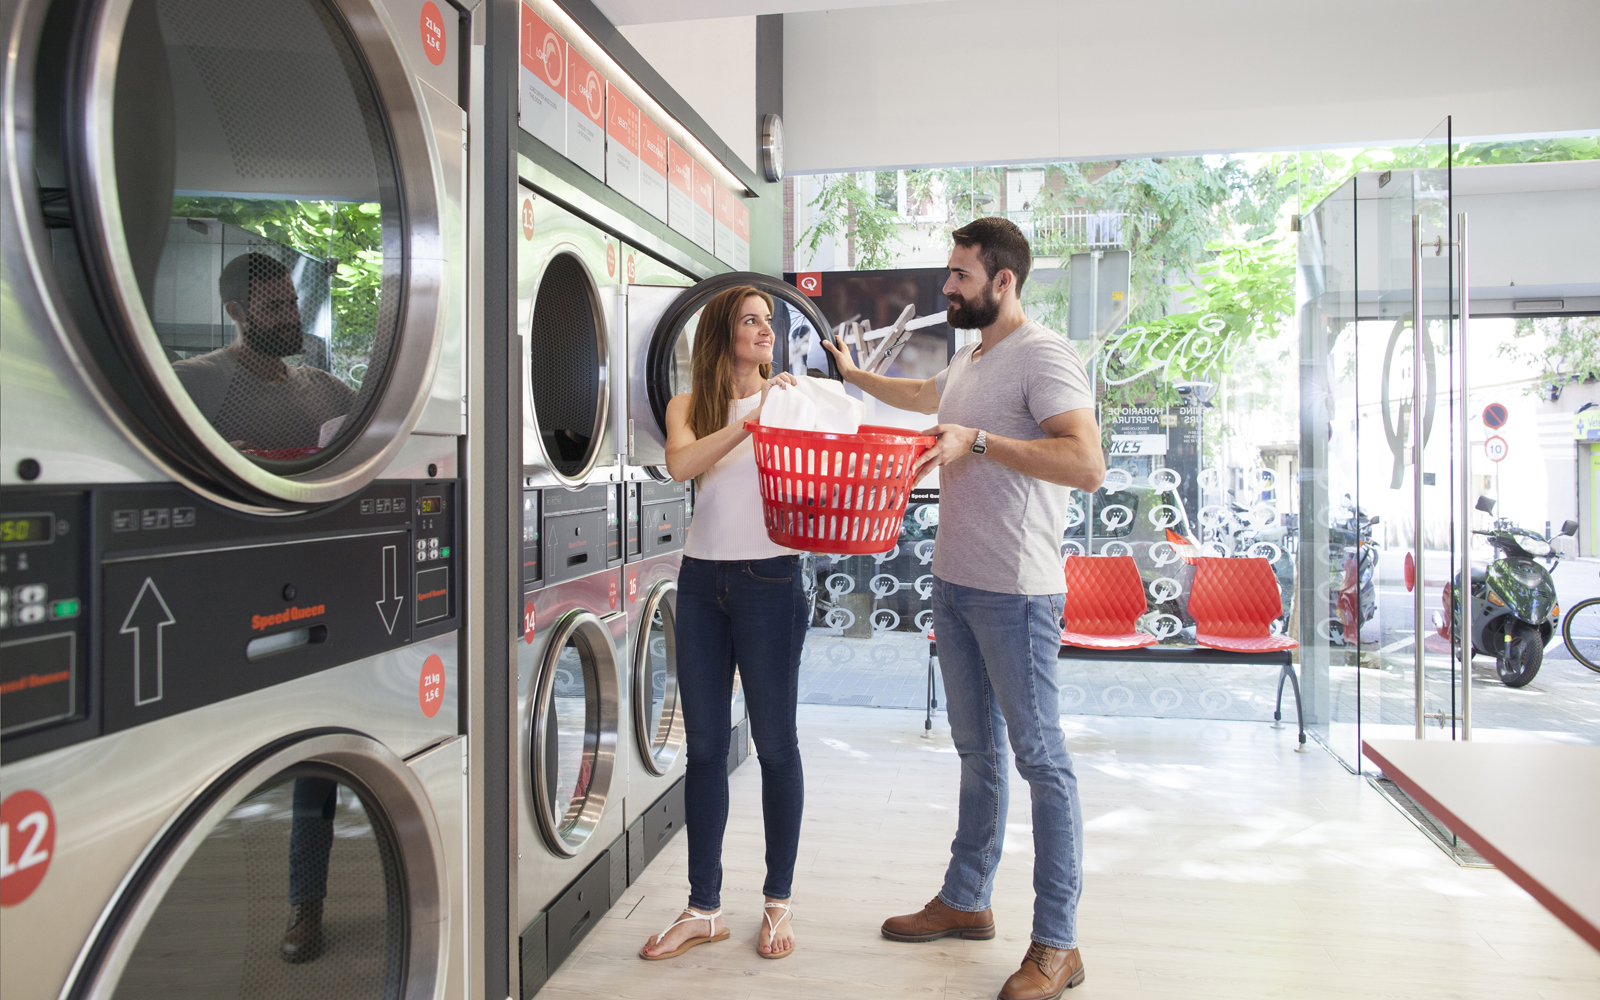   Alliance Laundry Systems  